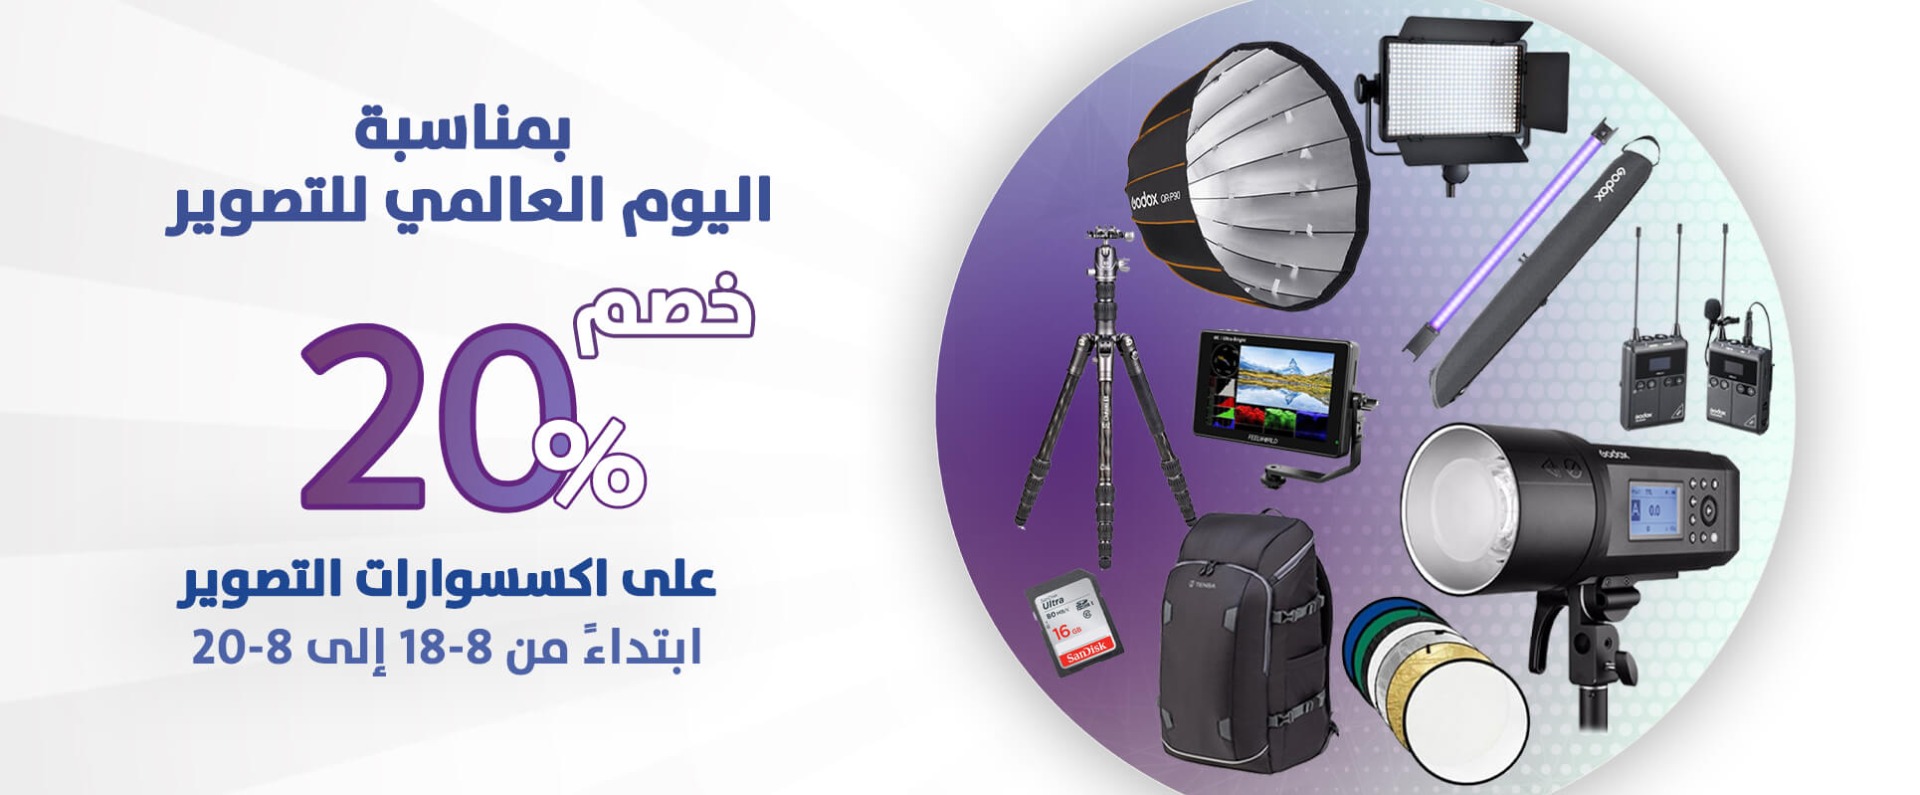 Photography Day Offer